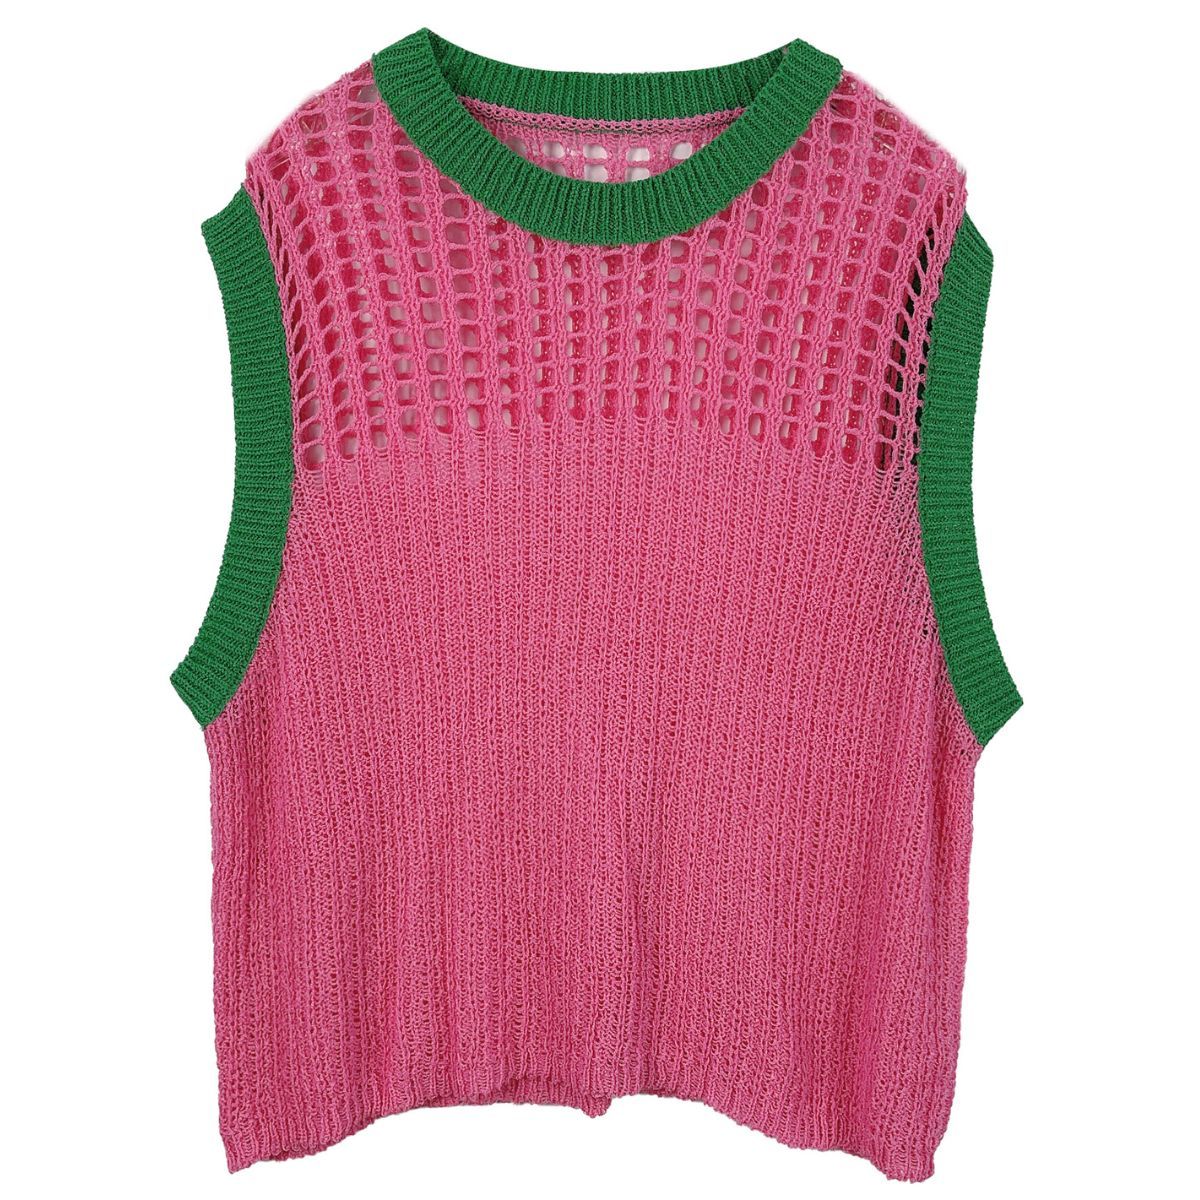 Vest Top Pink and Green Crochet for Women